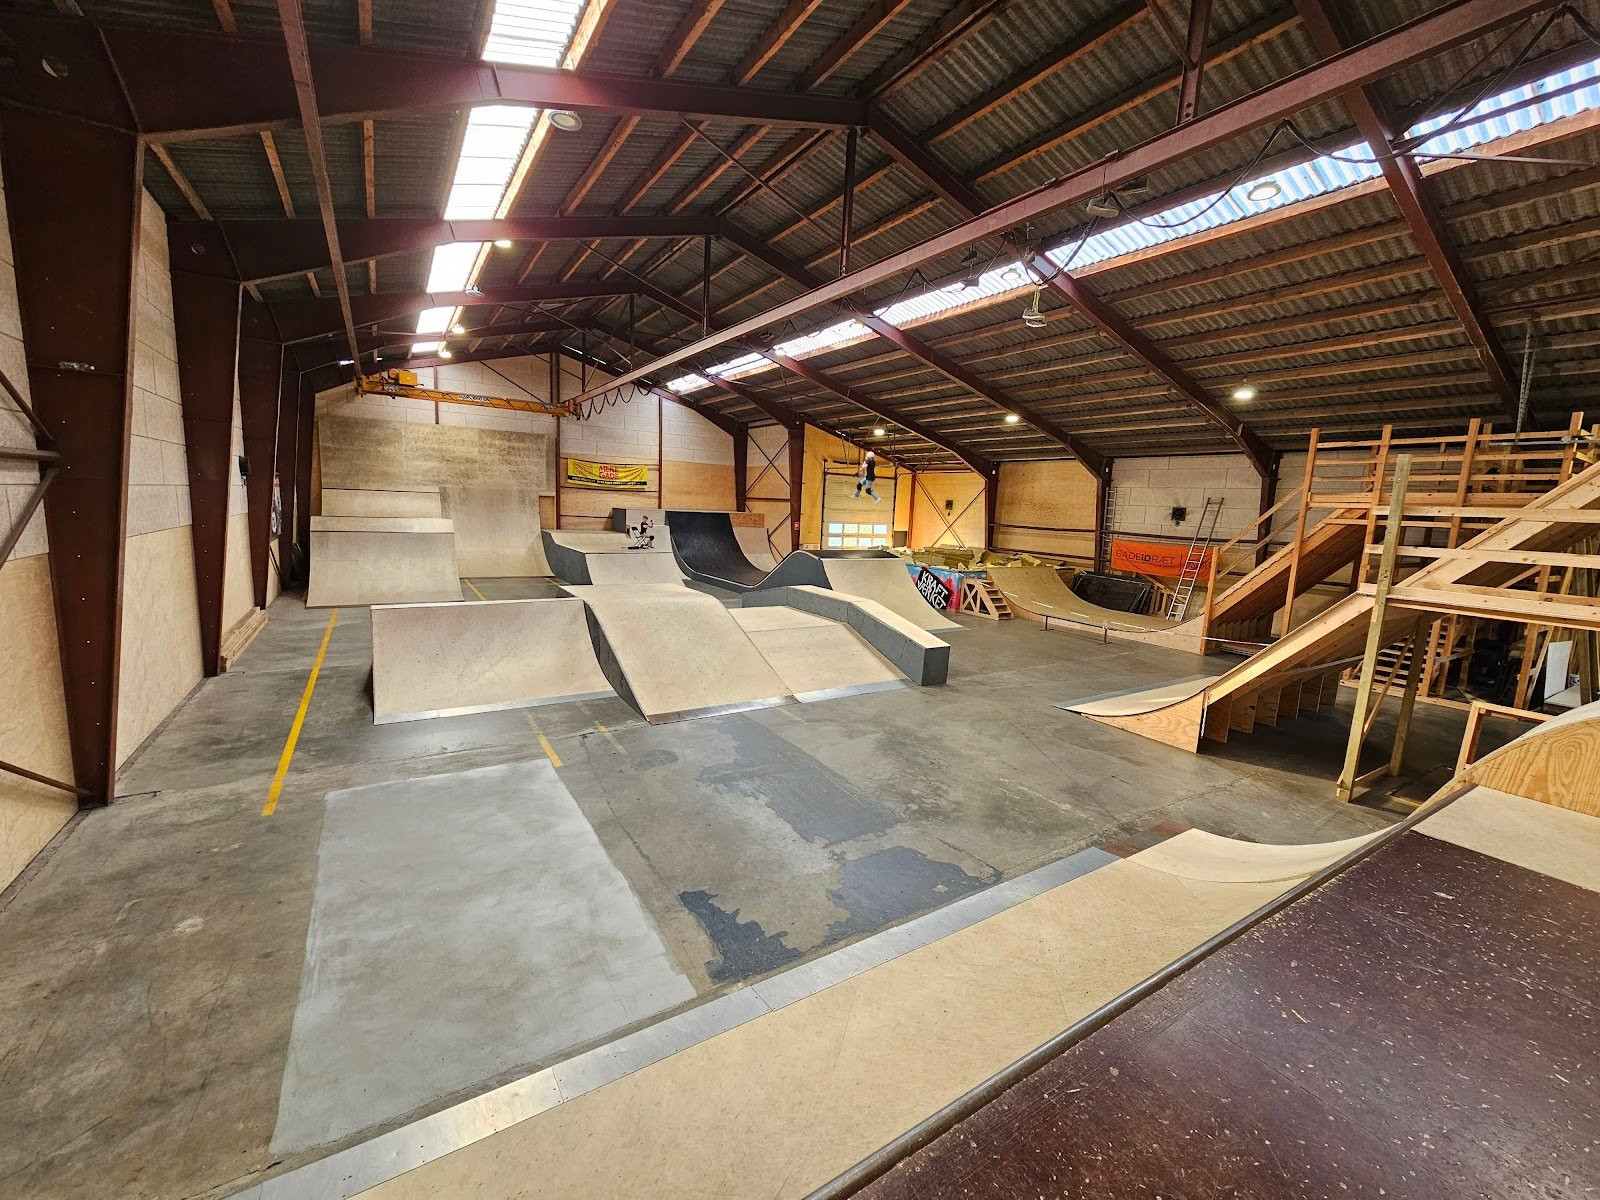 Kraftværket Skatepark is filled with obstacles without being too packed. The old straw works now houses banks, quarter pipes, grind boxes and many other obstacles. The indoor skatepark is built traditionally with a bank at one end and a quarter pipe at the other end. All this ensures a good flow when skating the park. The skate area also has a mini vert, which will be a familiar element for local skaters. This park is definitely worth a visit.The power station works in close collaboration the local skaters who use the park and often seeks input as to how they can improve the park.For more information, visit Kraftværket’s Facebook page. Here you can read about events and changes in general.You can find the opening hours on Facebook: Facebook page